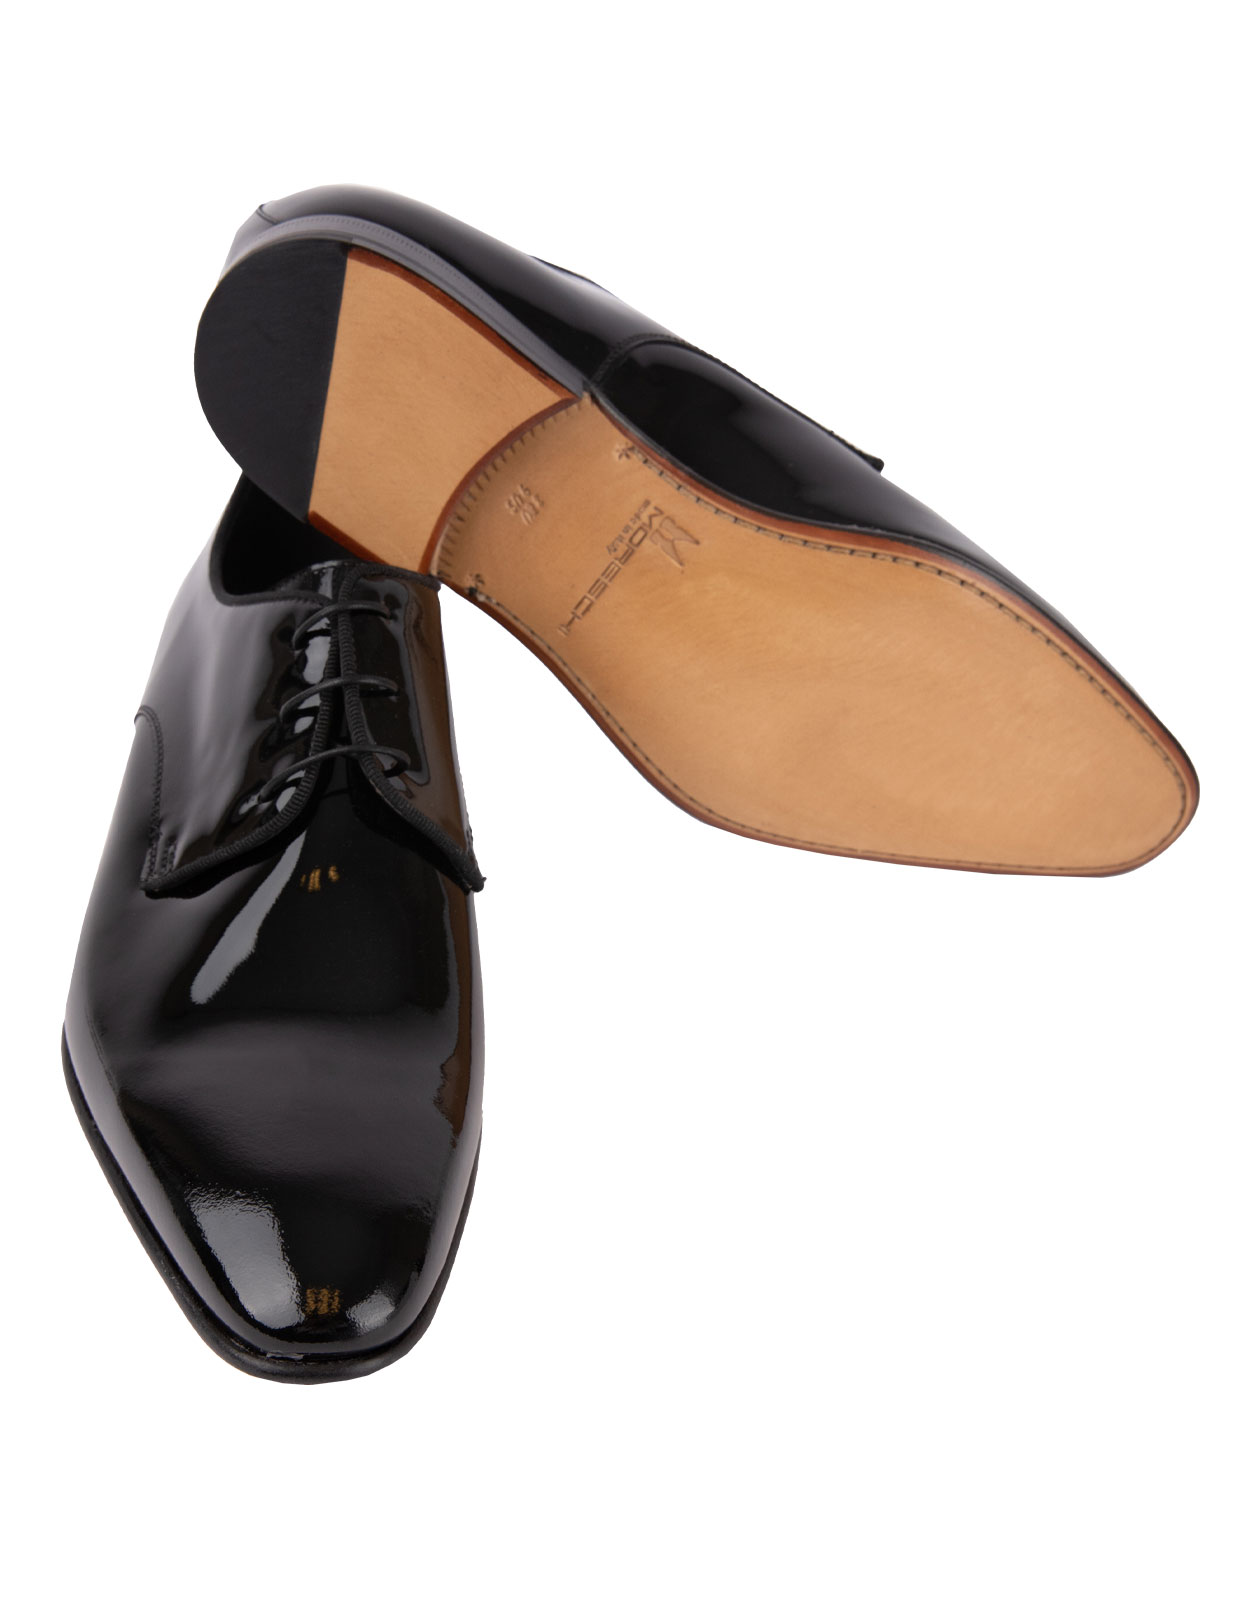 Lille Patent Leather Derby Shoes Black Stl 7